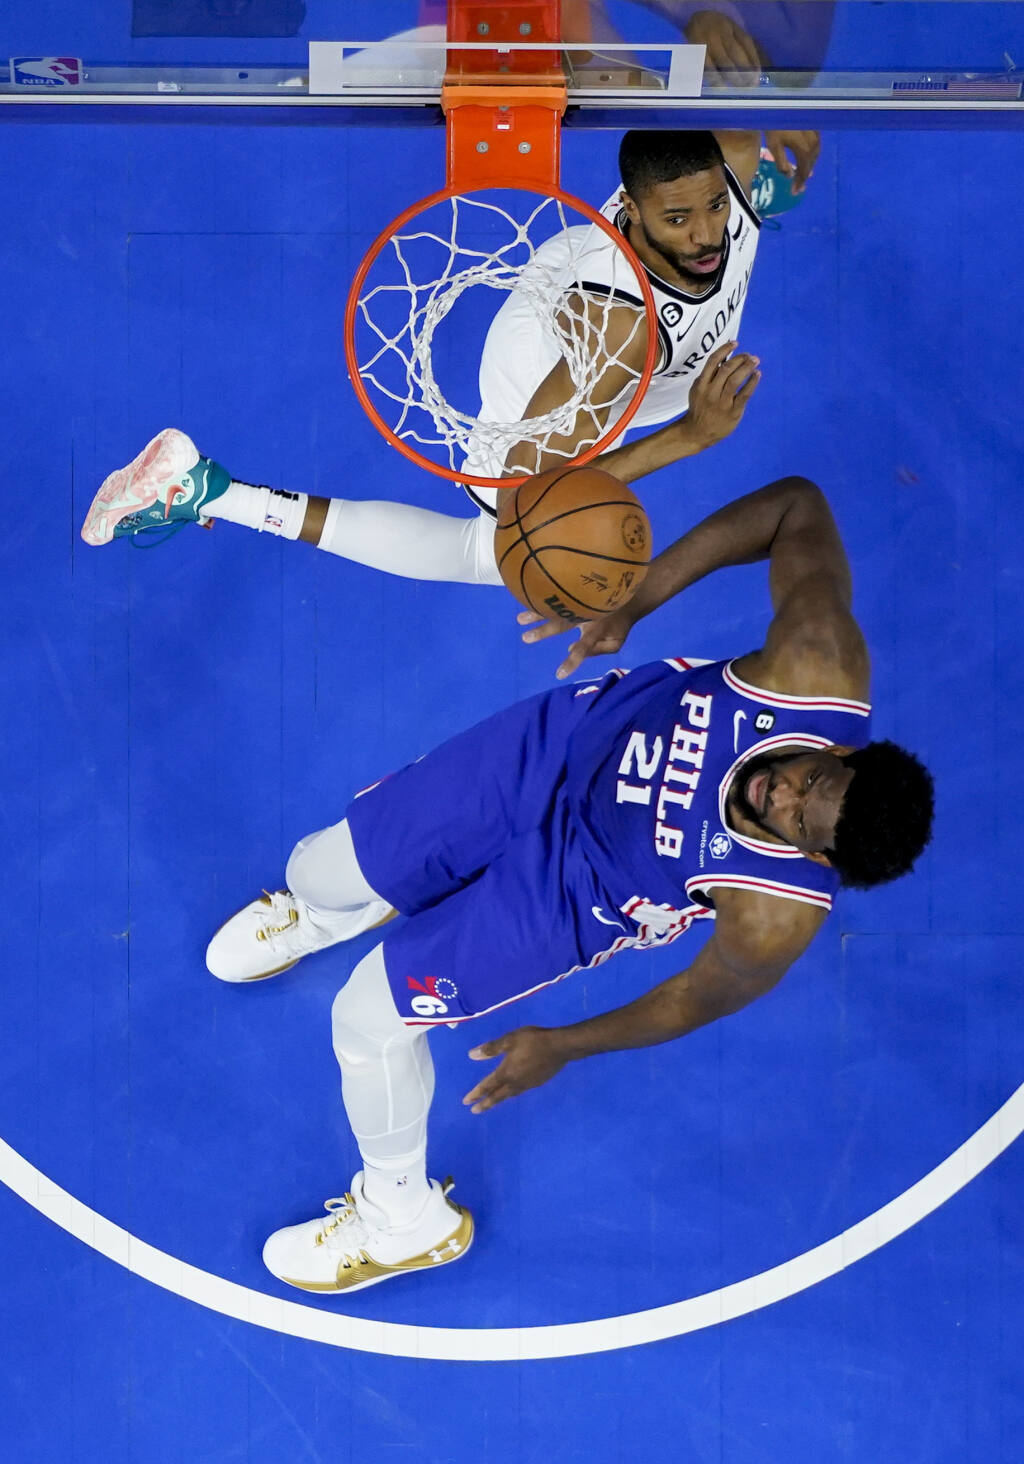 Joel Embiid is moving up in the MVP race, so you need some gear